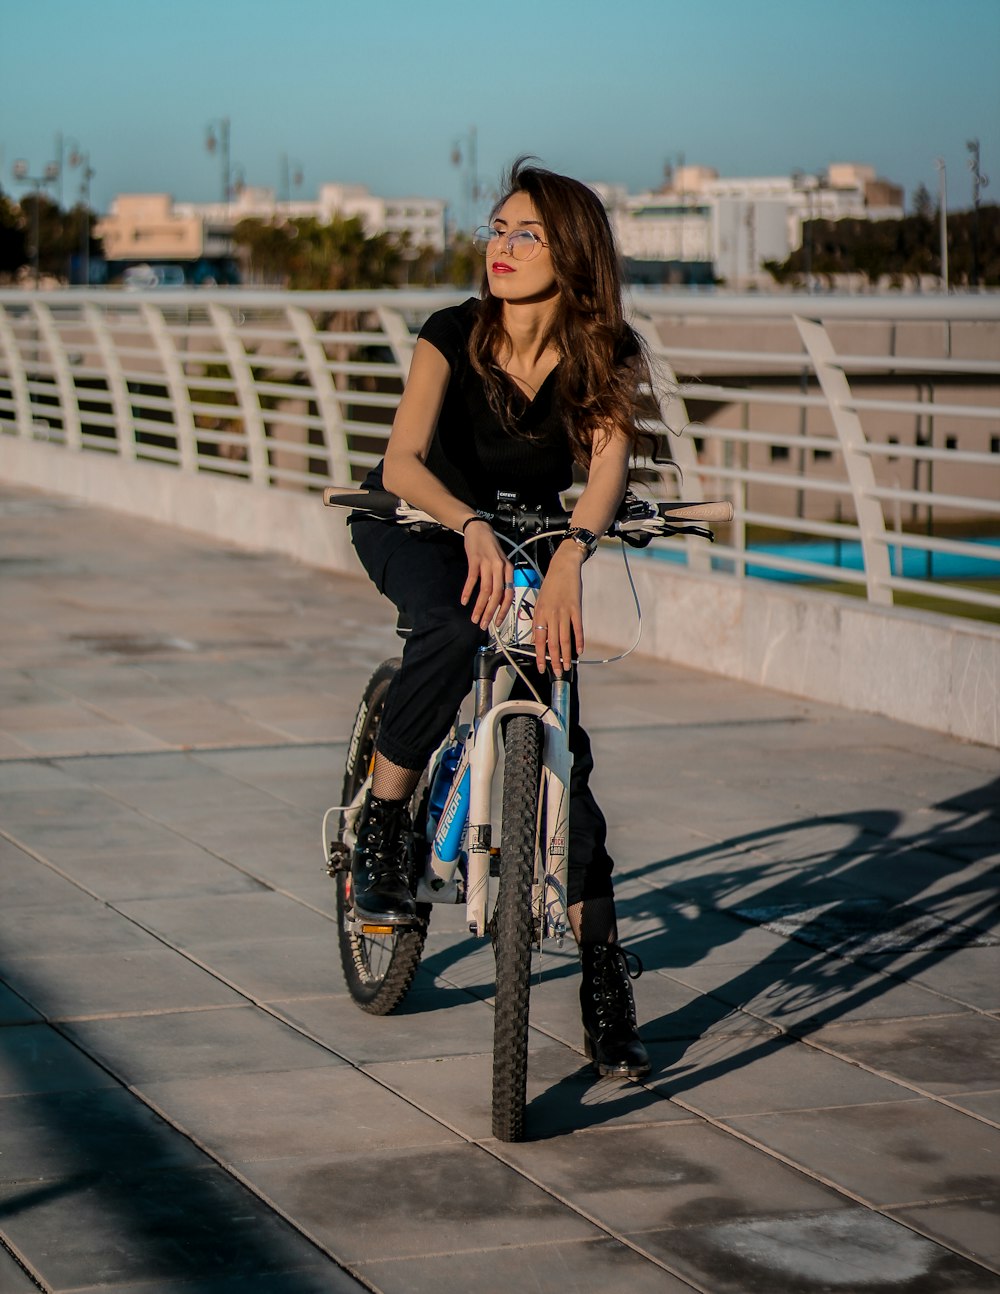 woman in black tank top riding on bicycle during daytime